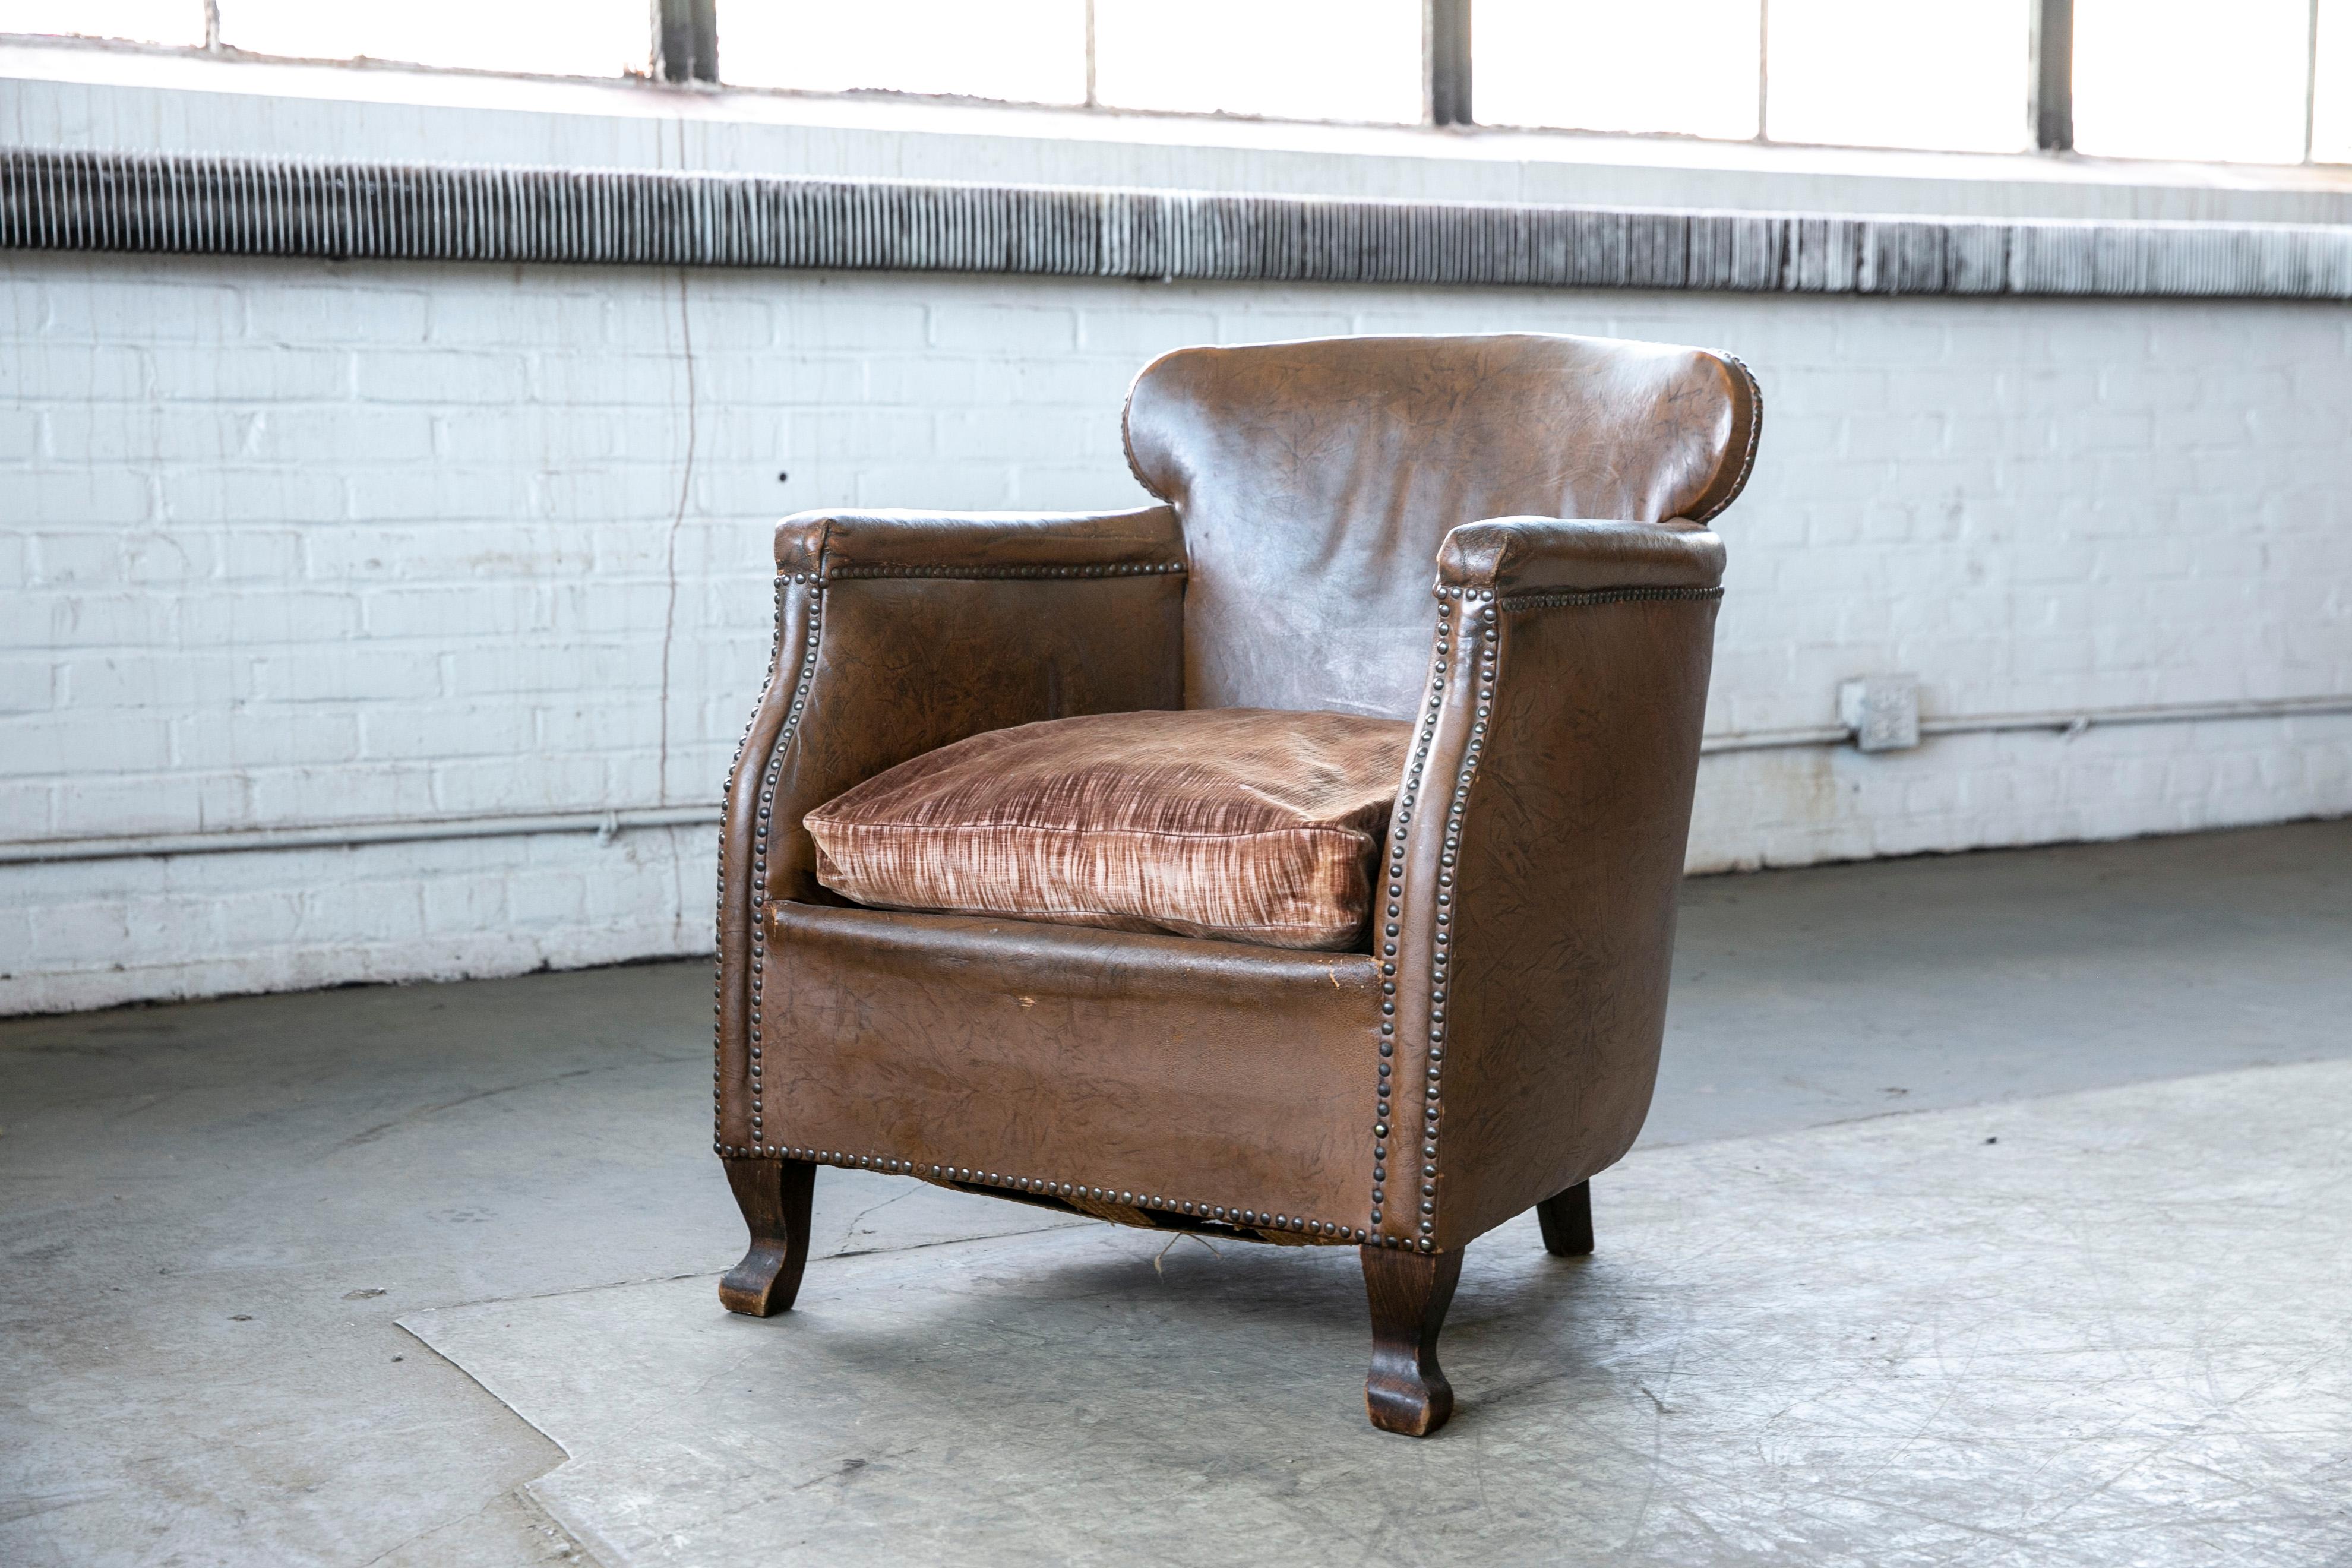 Charming small scale Danish club chair made by Danish Furniture Maker Oskar Hansen around the mid-1930s. Covered in original cognac brown leather with a smooth back and brass tacks in the armrests. Coil springs in the seat. Overall good condition